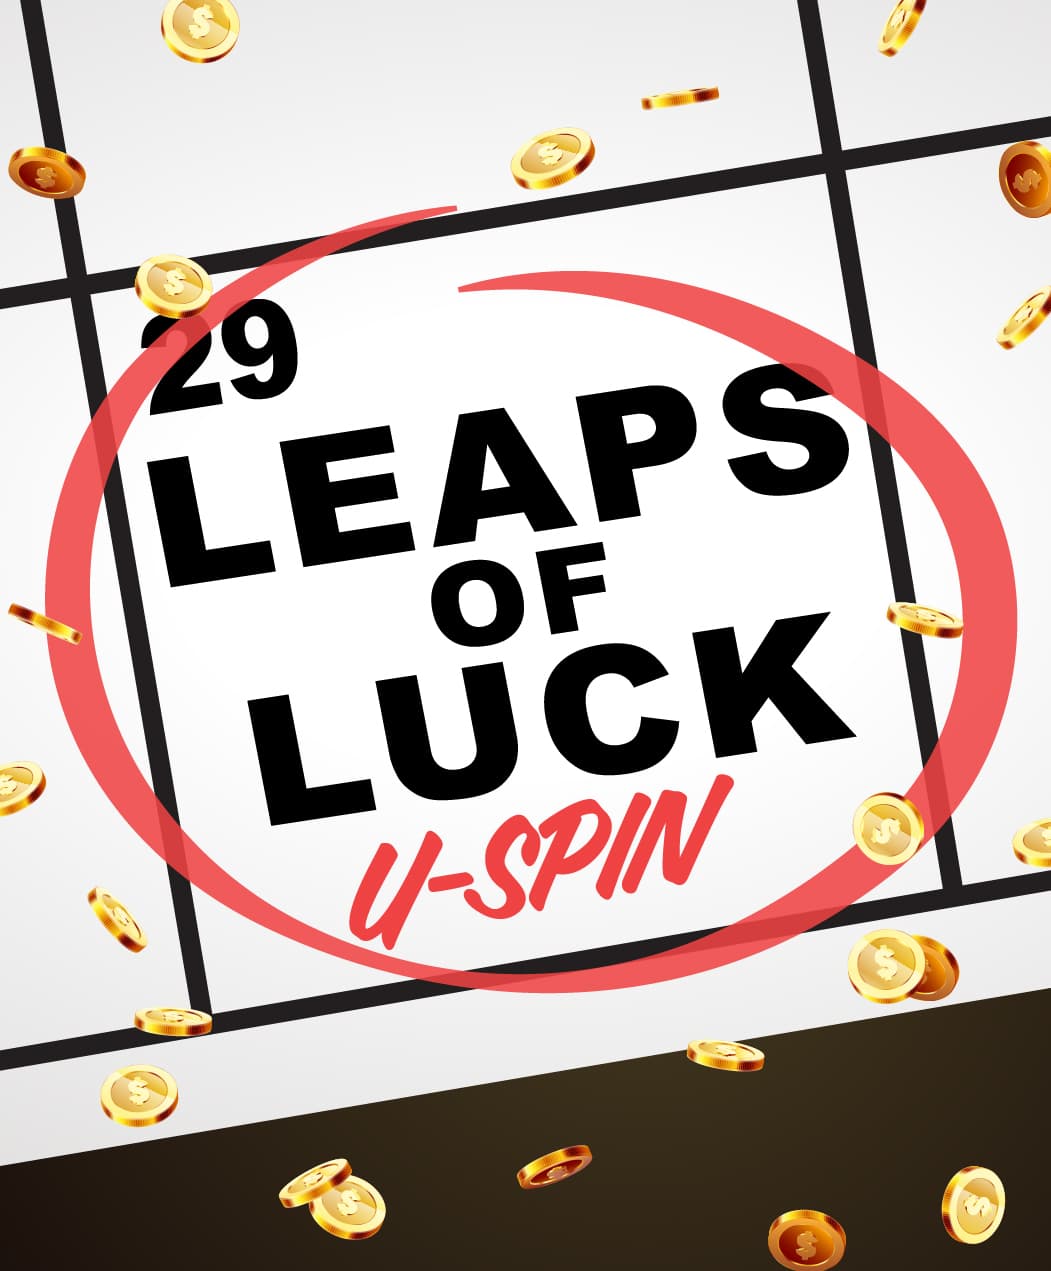 Leaps of Luck U-Spin